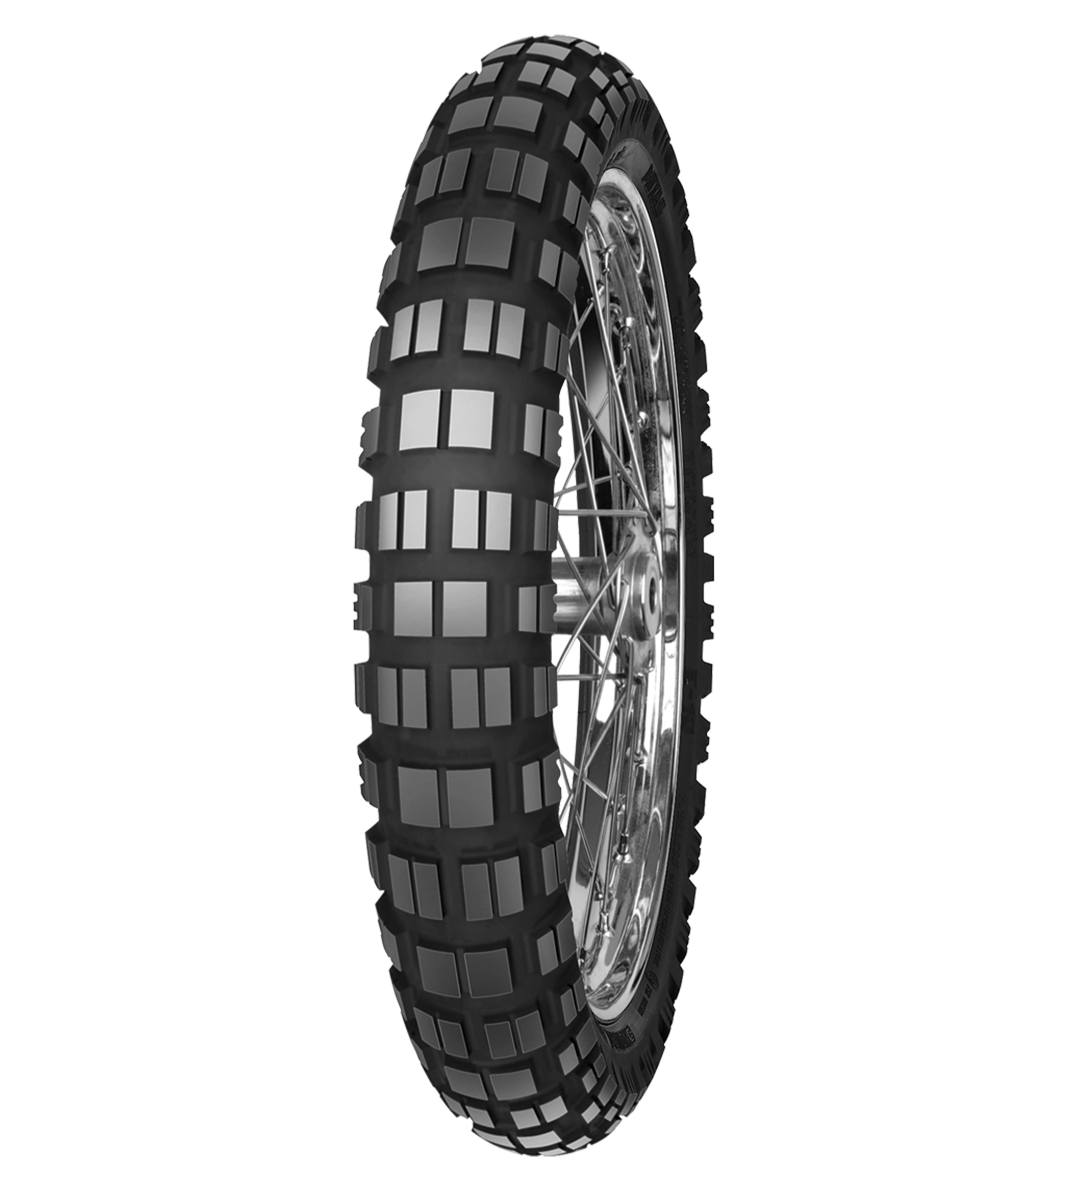 Mitas E-10 ENDURO 120/70B19 Trail OFF Trail 60Q No Stripe Tubeless Front Tire, 224141, 120/70B19, Adventure Touring, E Series, E-10 Enduro, Front, Trail, Trail OFF, Tires - Imported and distributed in North & South America by Lindeco Genuine Powersports - Premier Powersports Equipment and Accessories for Motorcycle Enthusiasts, Professional Riders and Dealers.